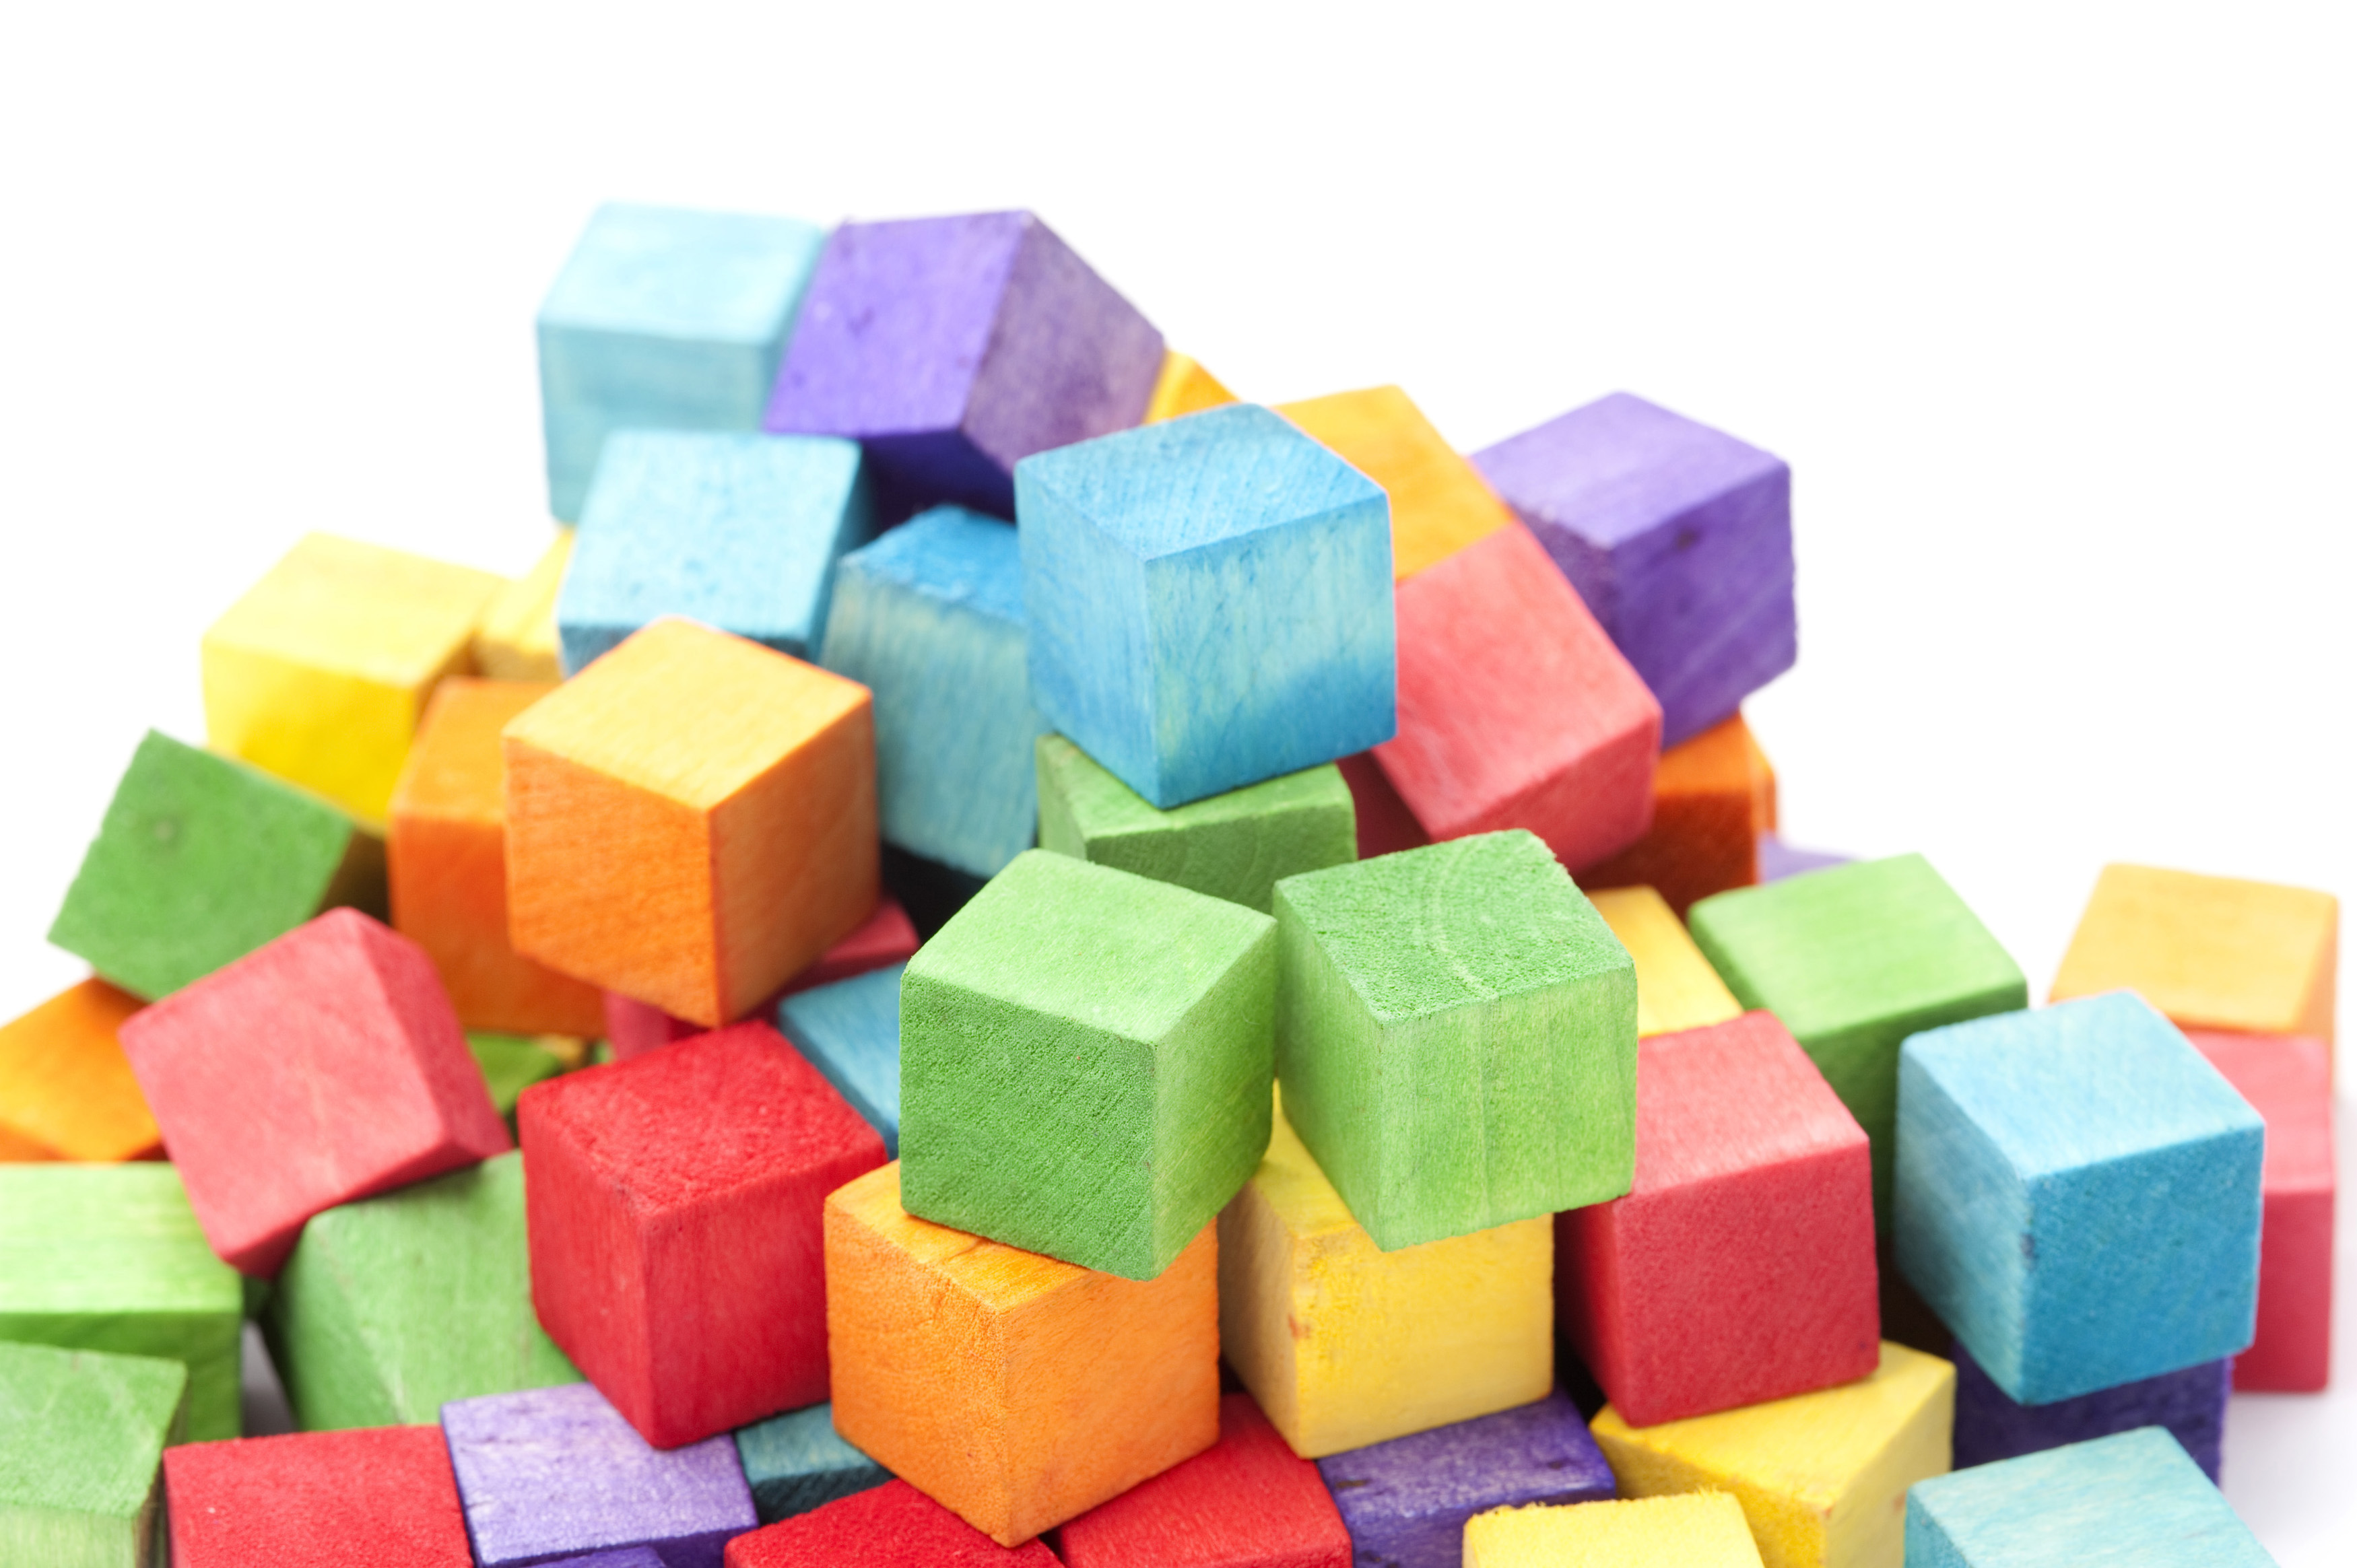 Free Stock Photo 11969 Jumbled Pile of Colorful Wooden Toy Blocks | freeimageslive